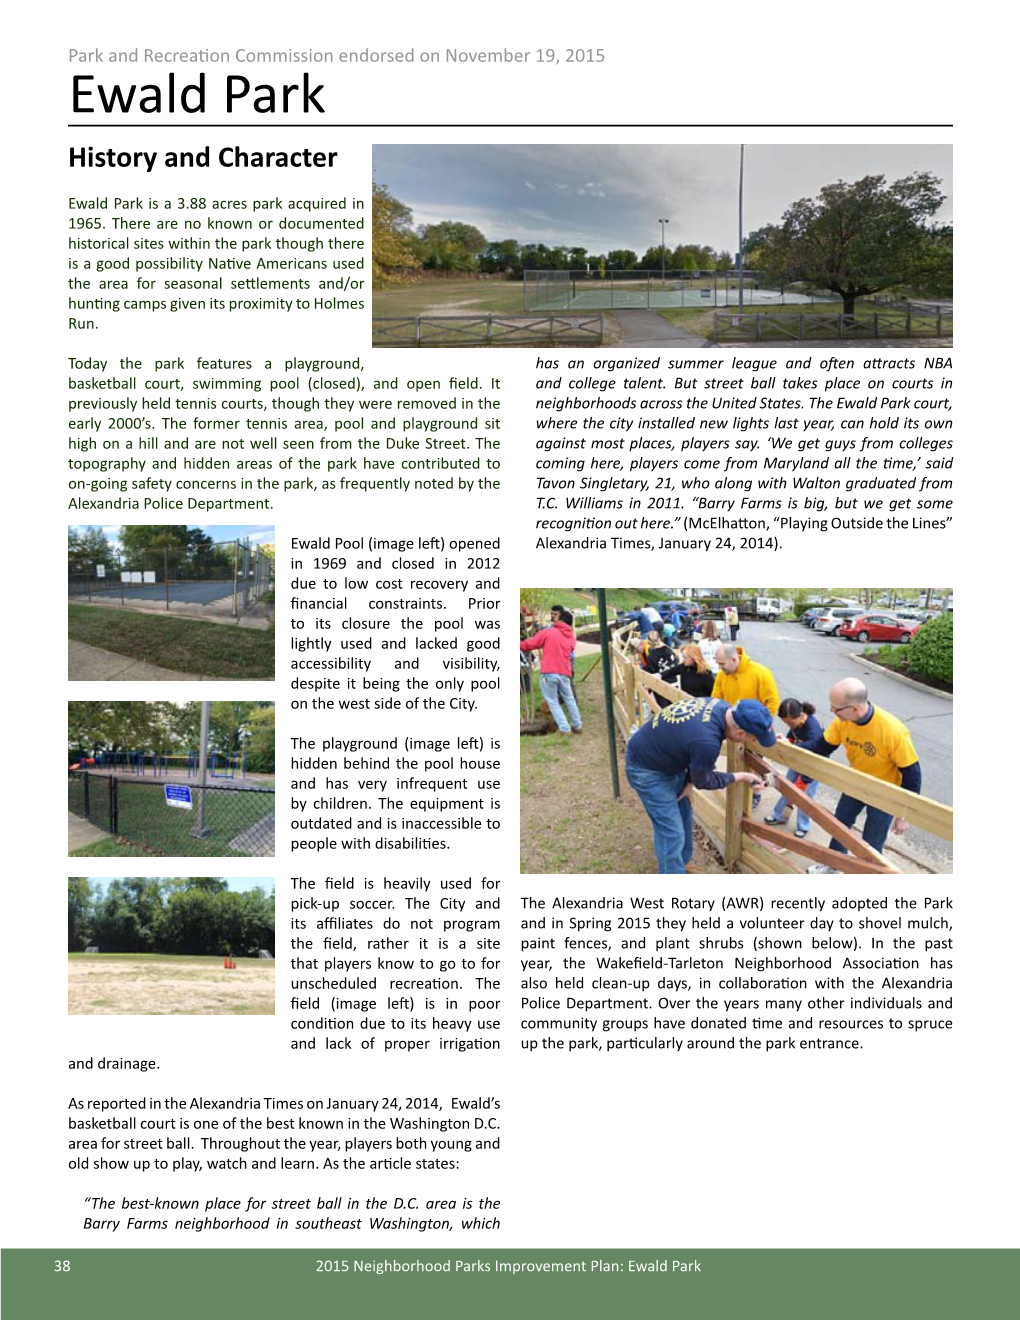 Ewald Park History and Character